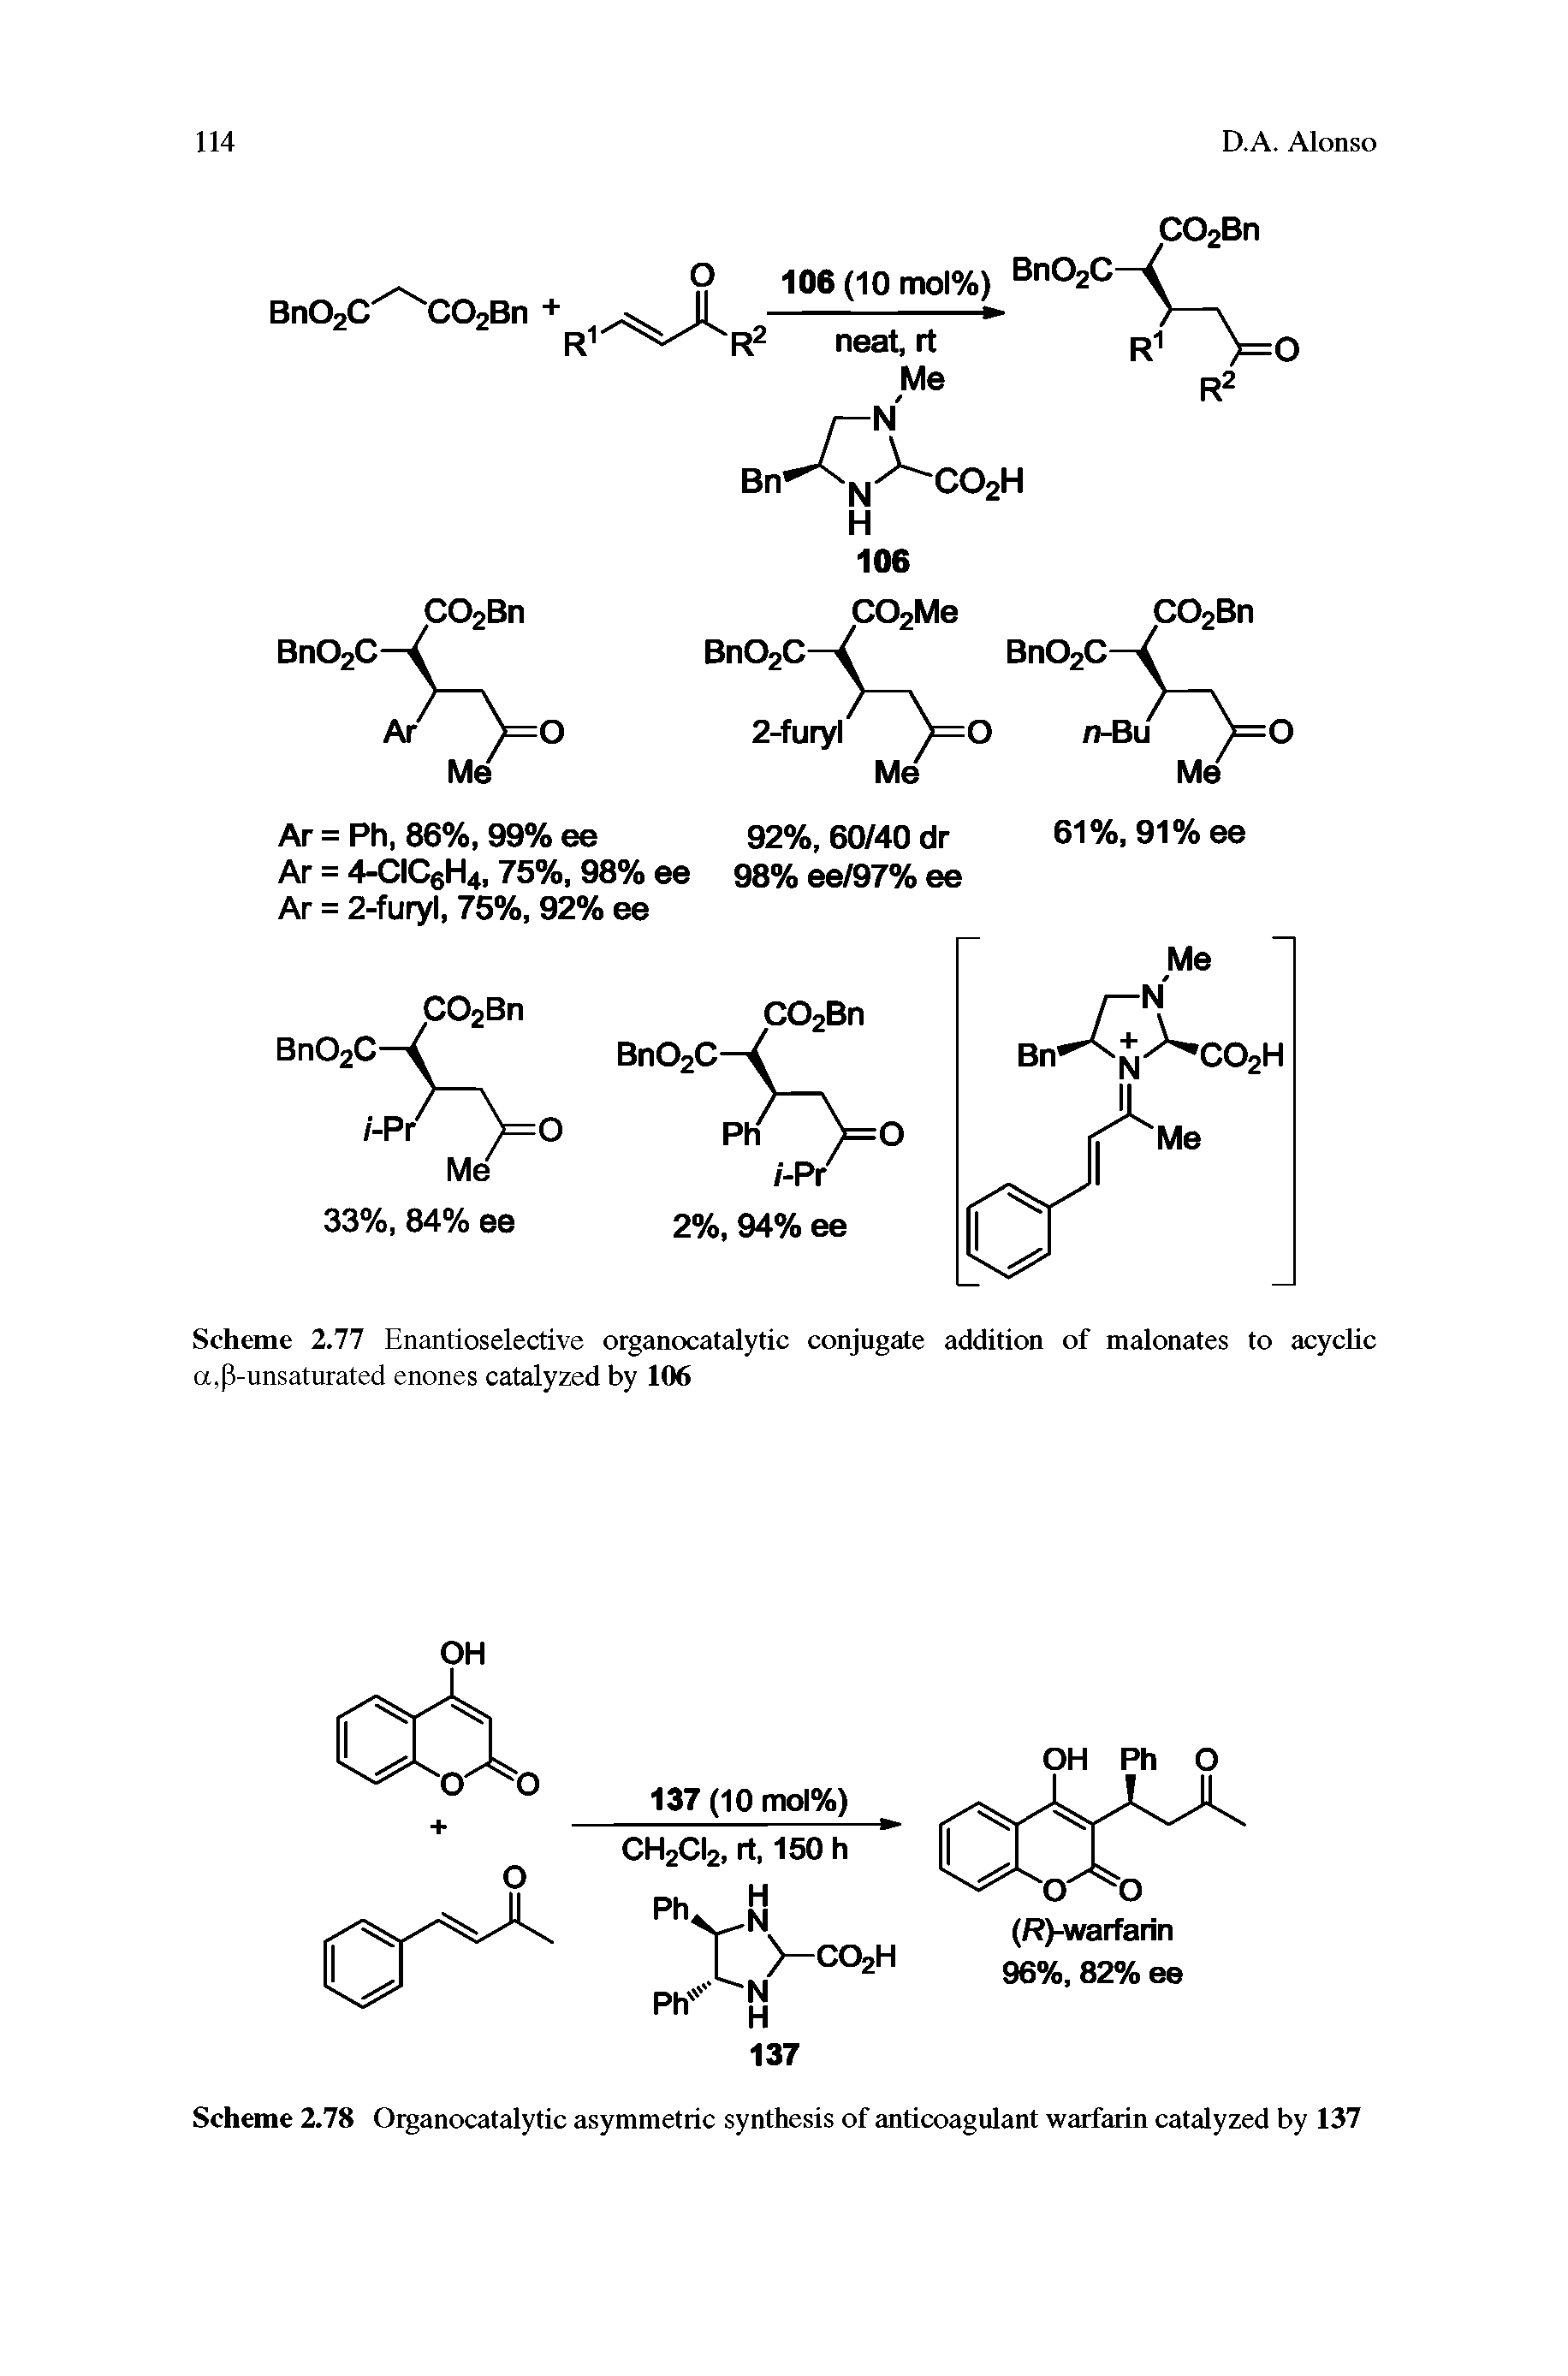 Scheme 2.77 Enantioselective organocatalytic conjugate addition of malonates to acyclic a,p-unsaturated enones catalyzed by 106...